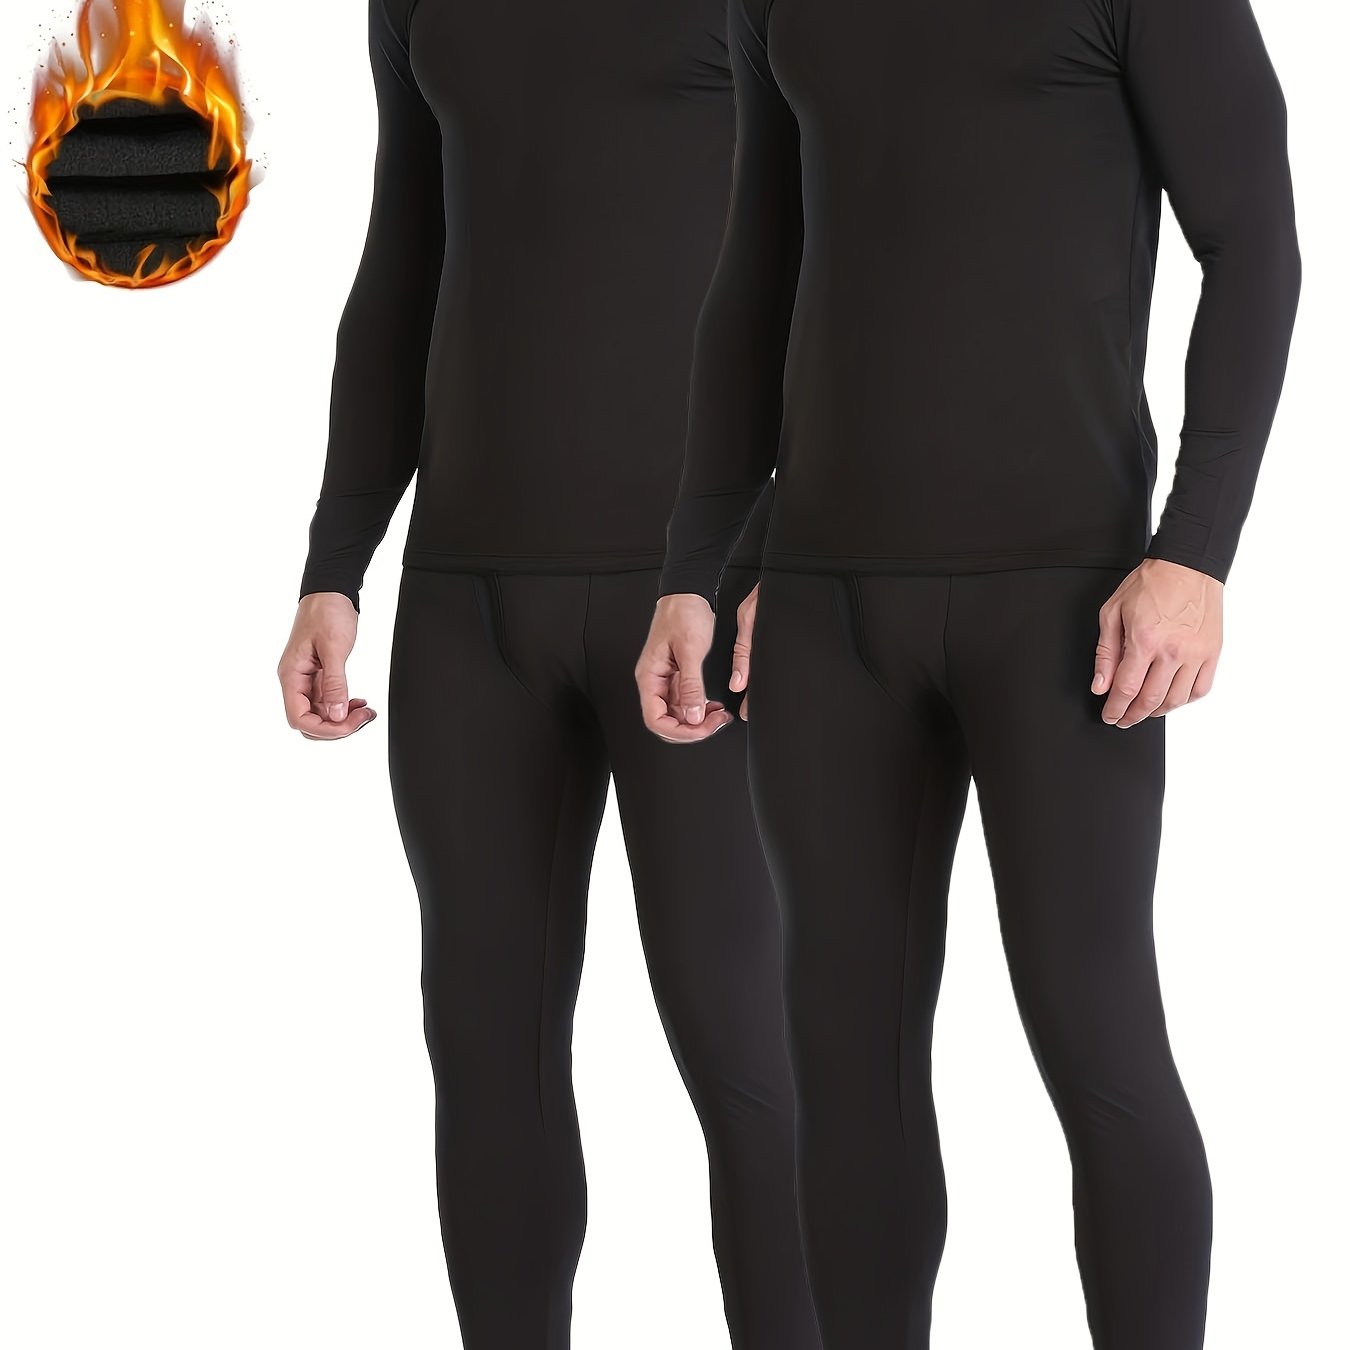 Winter Thermal Long Underwear Mens Set First Layer Long Johns For